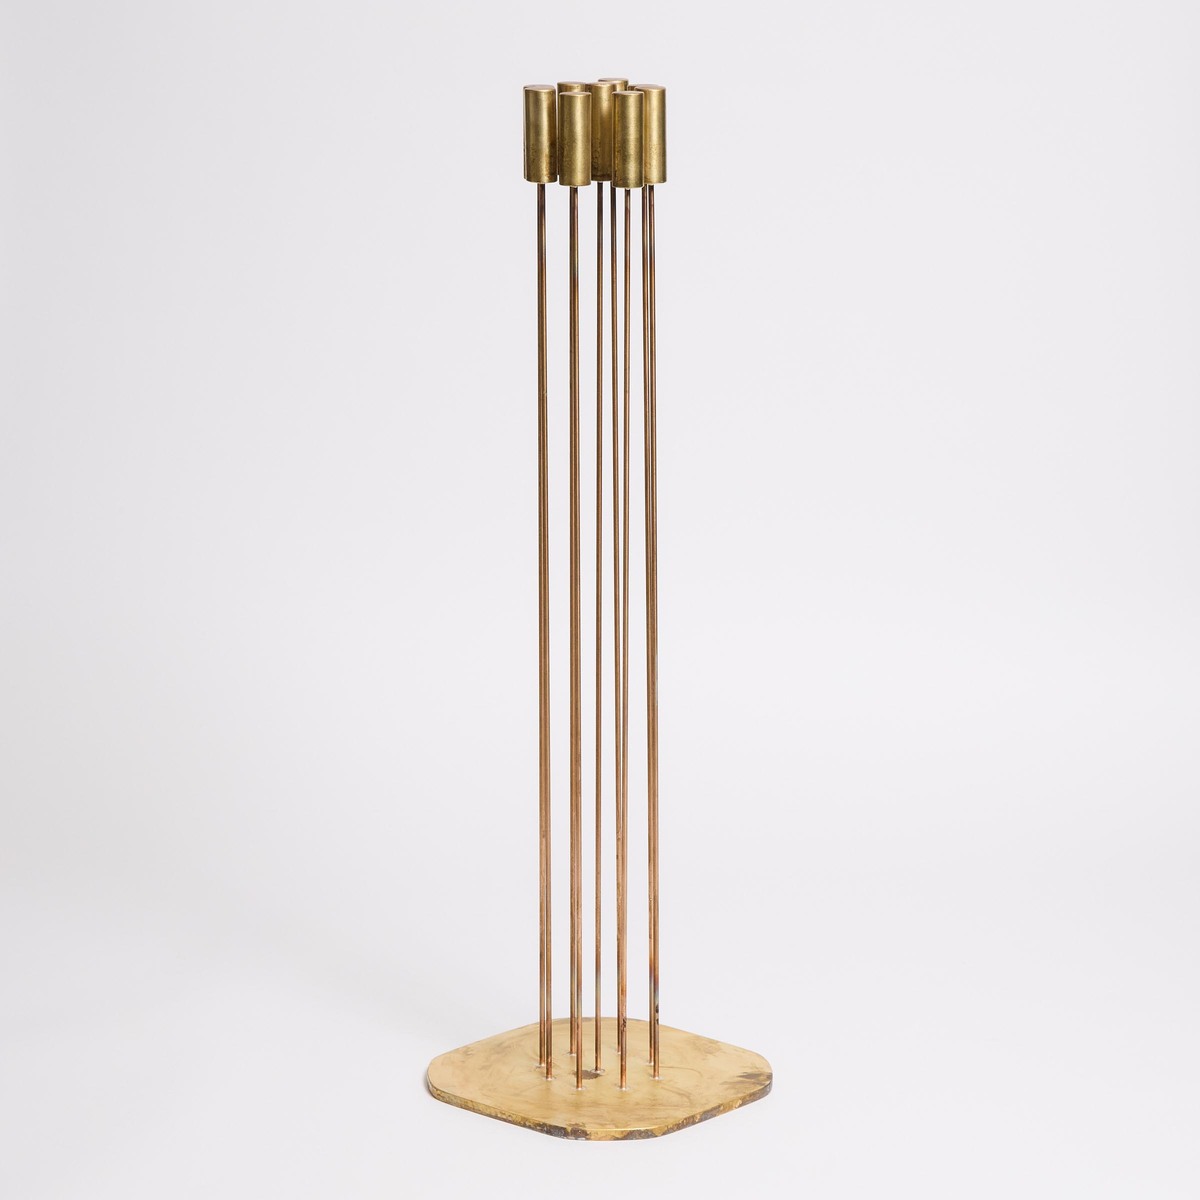 Val Bertoia (b. 1949), B-2858, 1 SURROUNDED BY 8 SOUNDS GREAT, 2024, incised title "B-2858" on base - Image 2 of 3